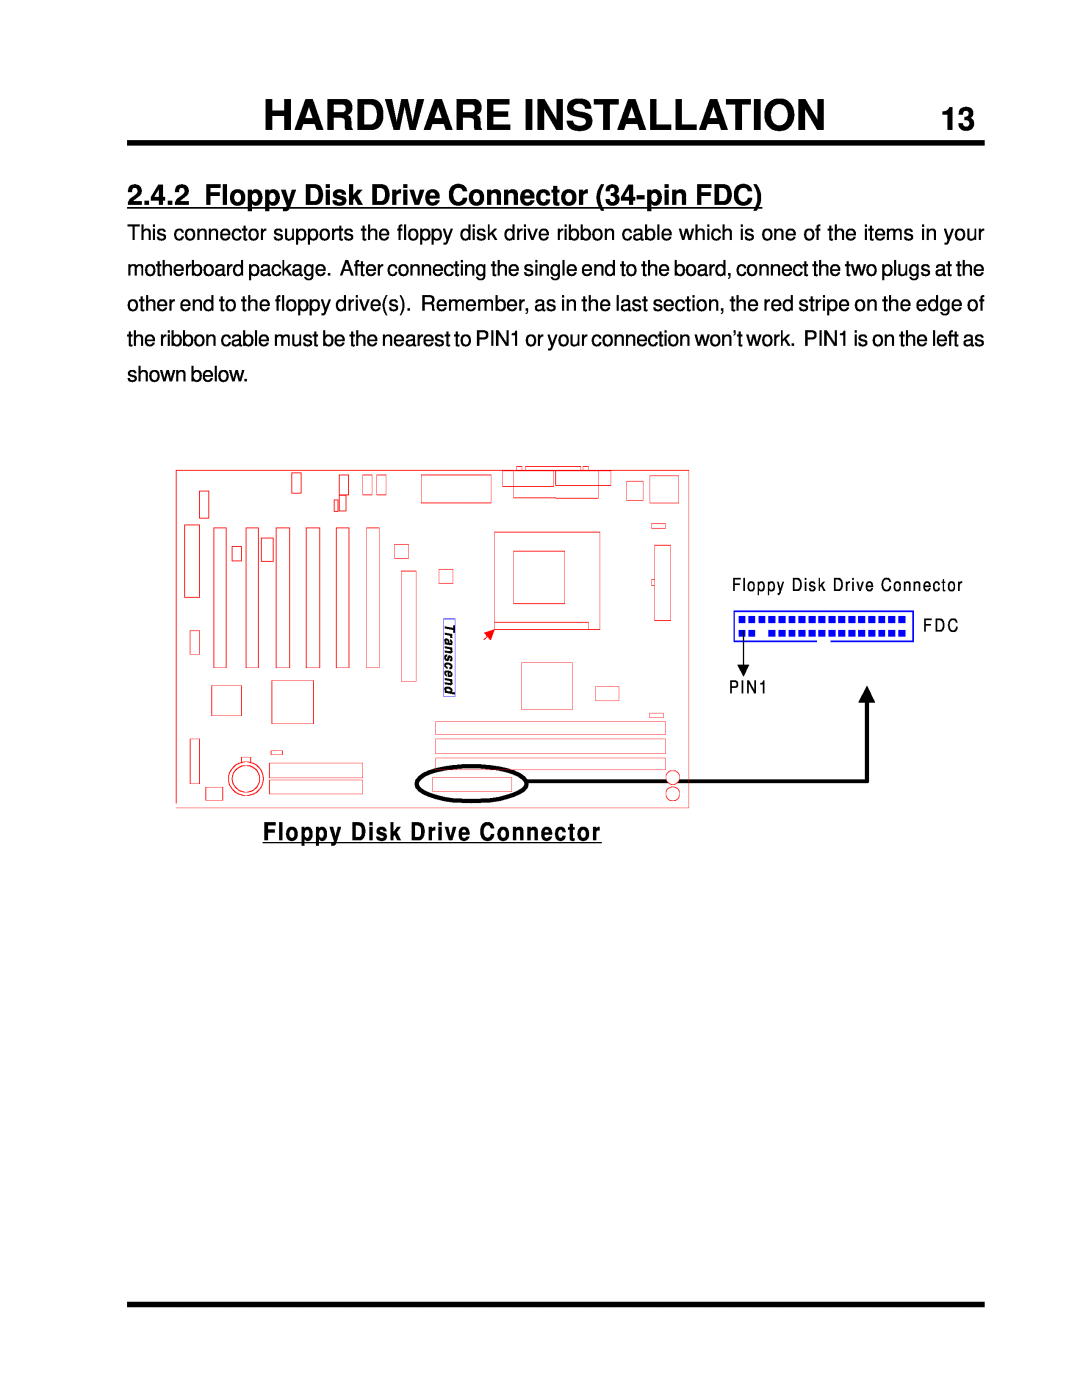 Intel TS-ASP3 user manual Floppy Disk Drive Connector 34-pinFDC, Hardware Installation 